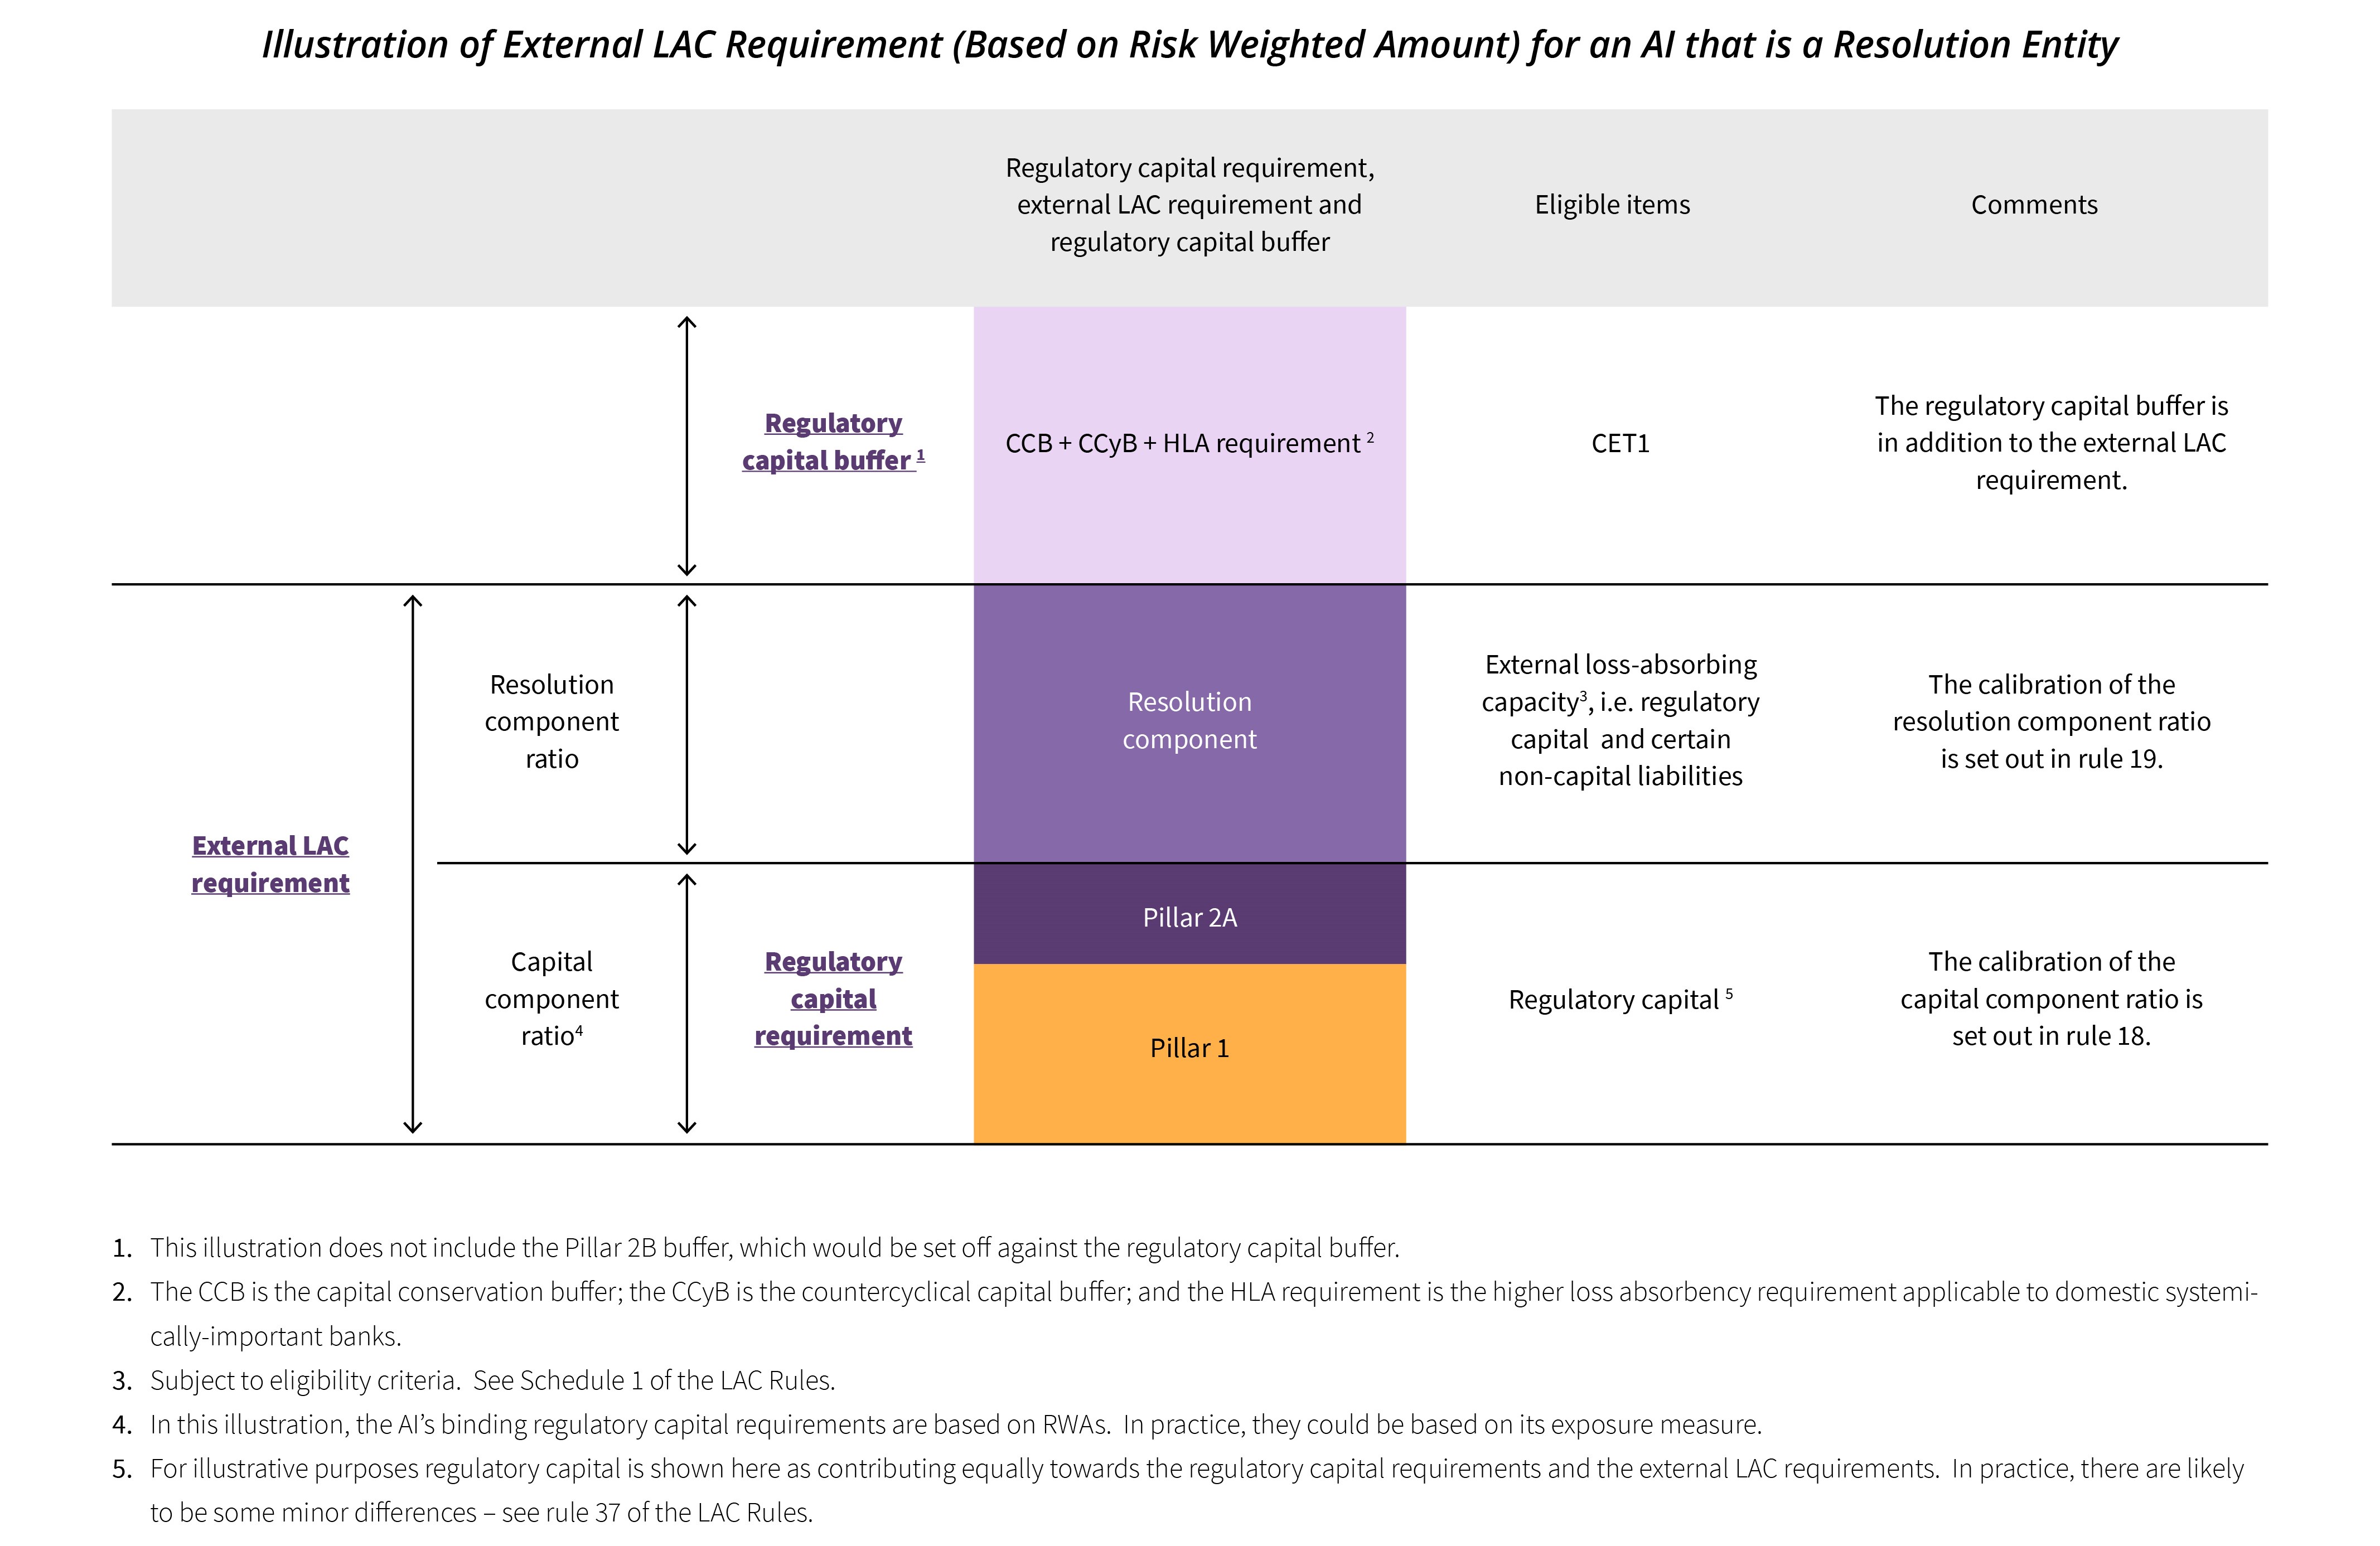 Illustration of External LAC Requirement (Based on Risk Weighted Amount) for a Bank that is a Resolution Entity